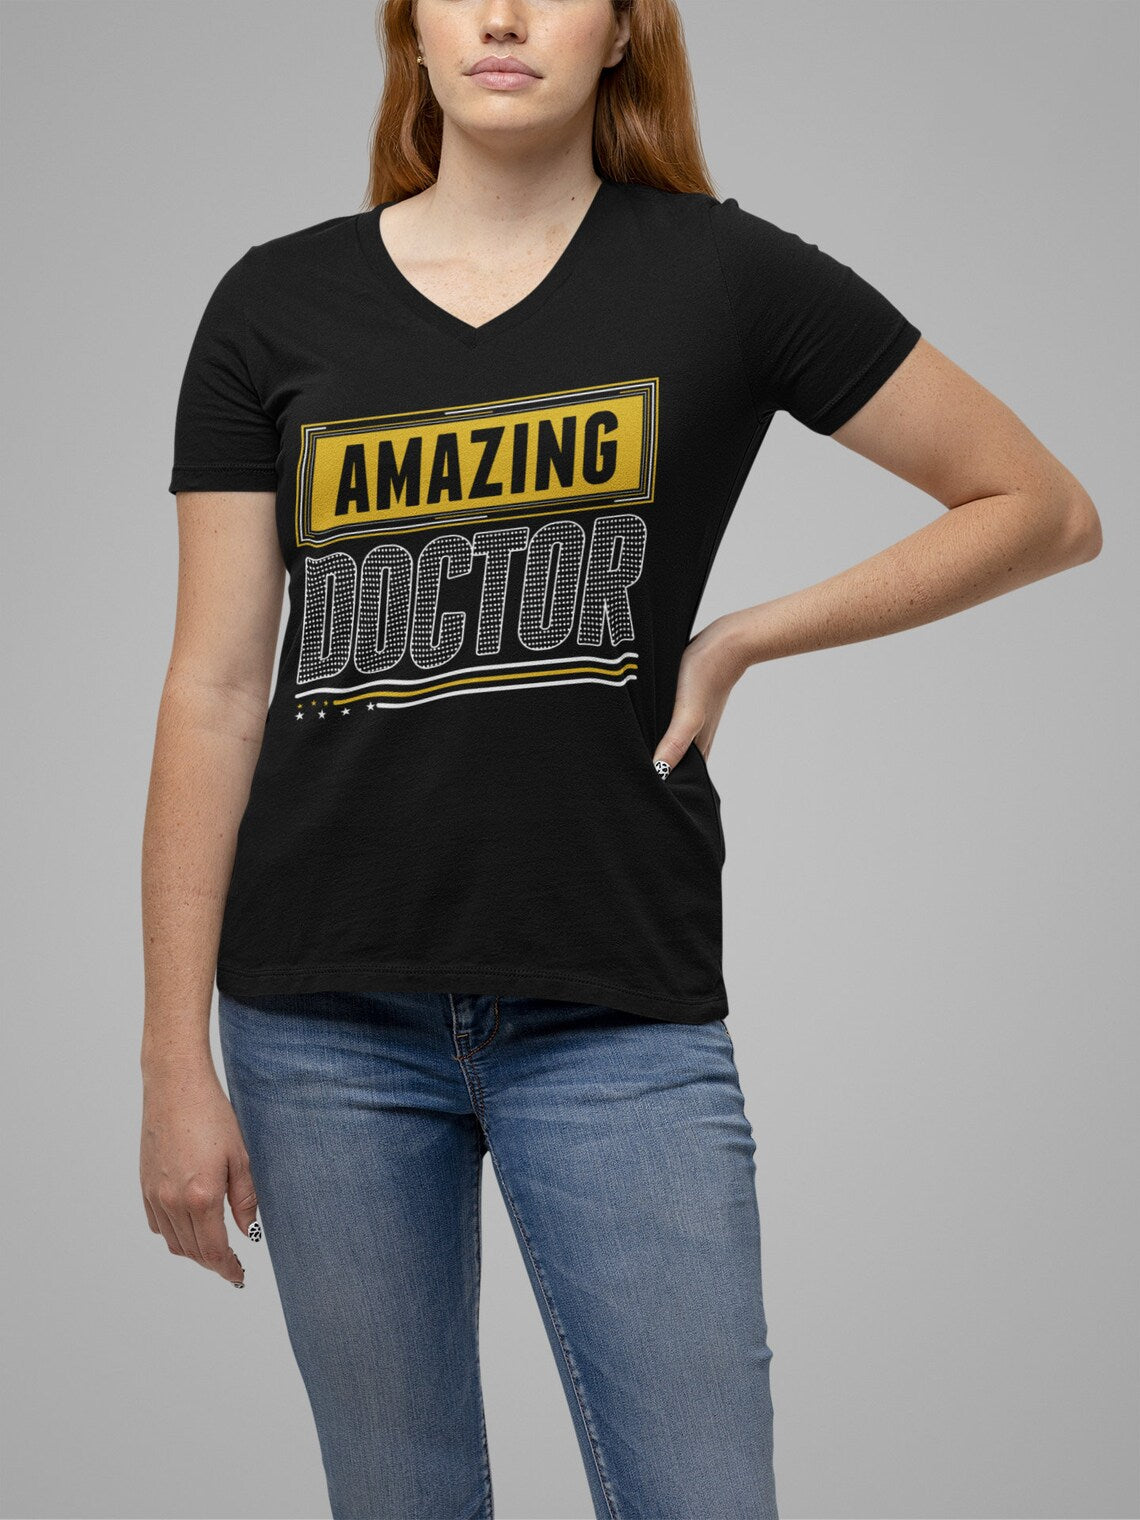 Amazing Doctor Women's Short Sleeve V-Neck Tee, Doctor shirts, Doctor gift ideas, gift for doctors, women shirt with doctor design